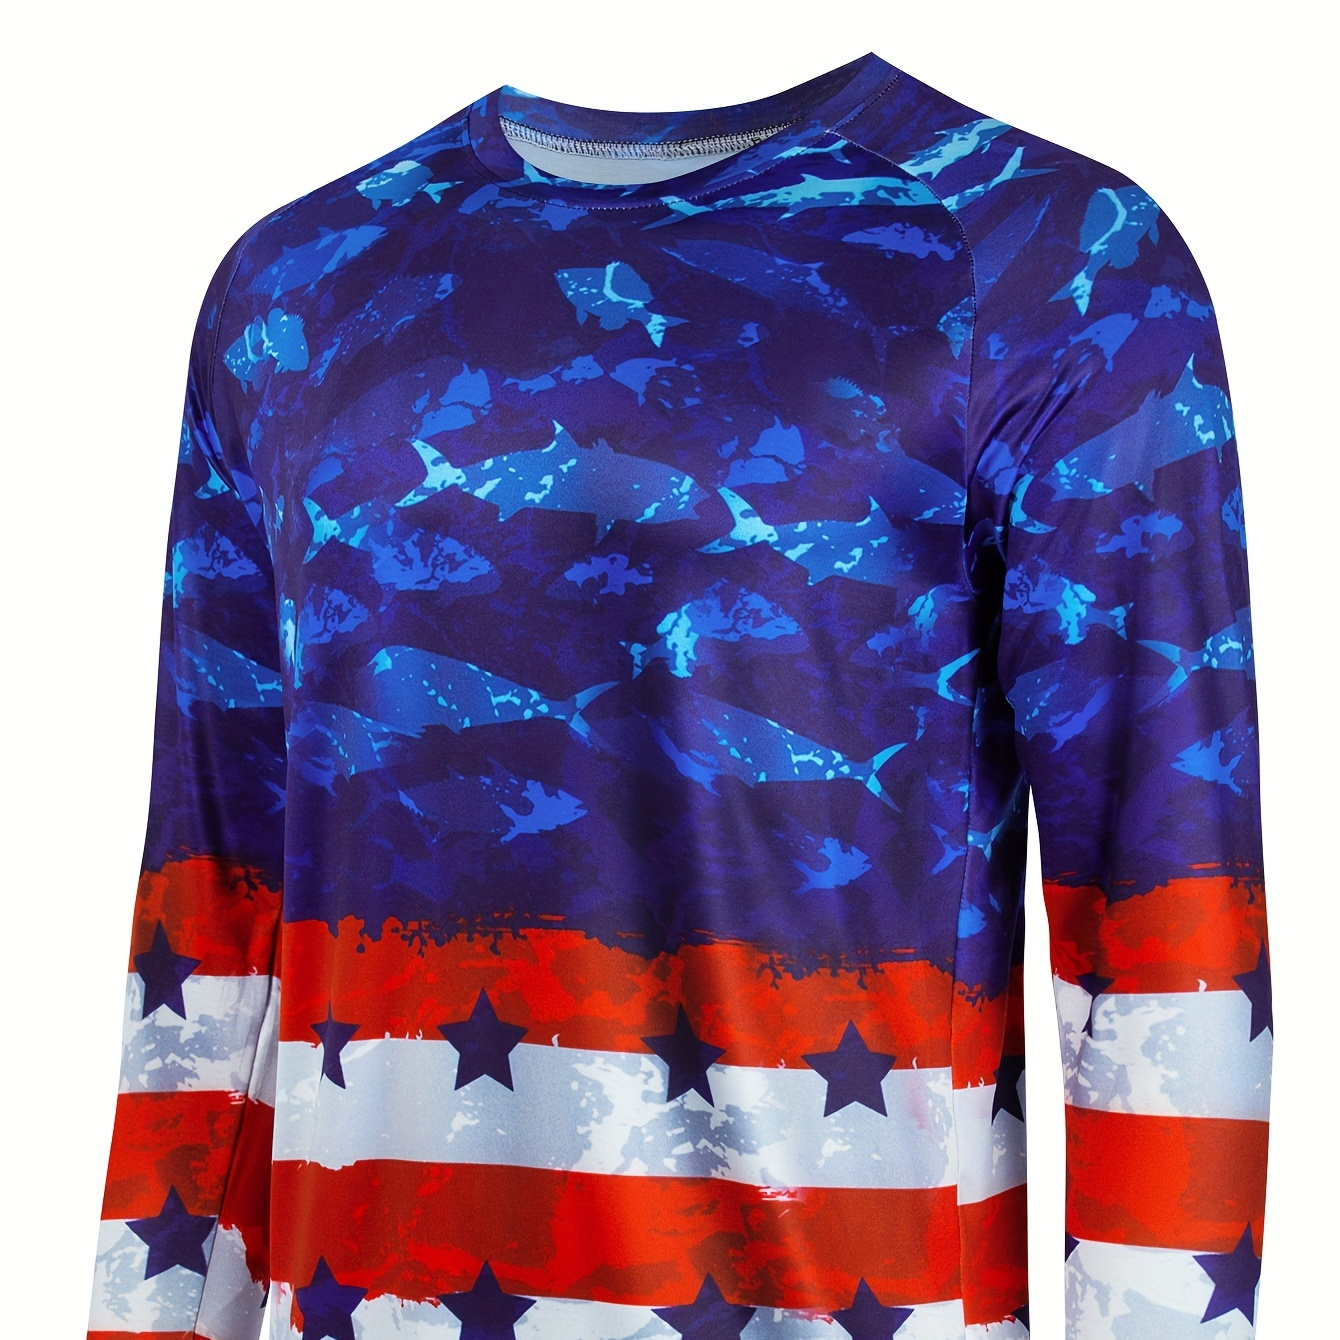 

Flag Digital Print Men's Casual Long Sleeve Round Neck Rash Guard, Men's Breathable Sunscreen Fishing Top For Outdoor